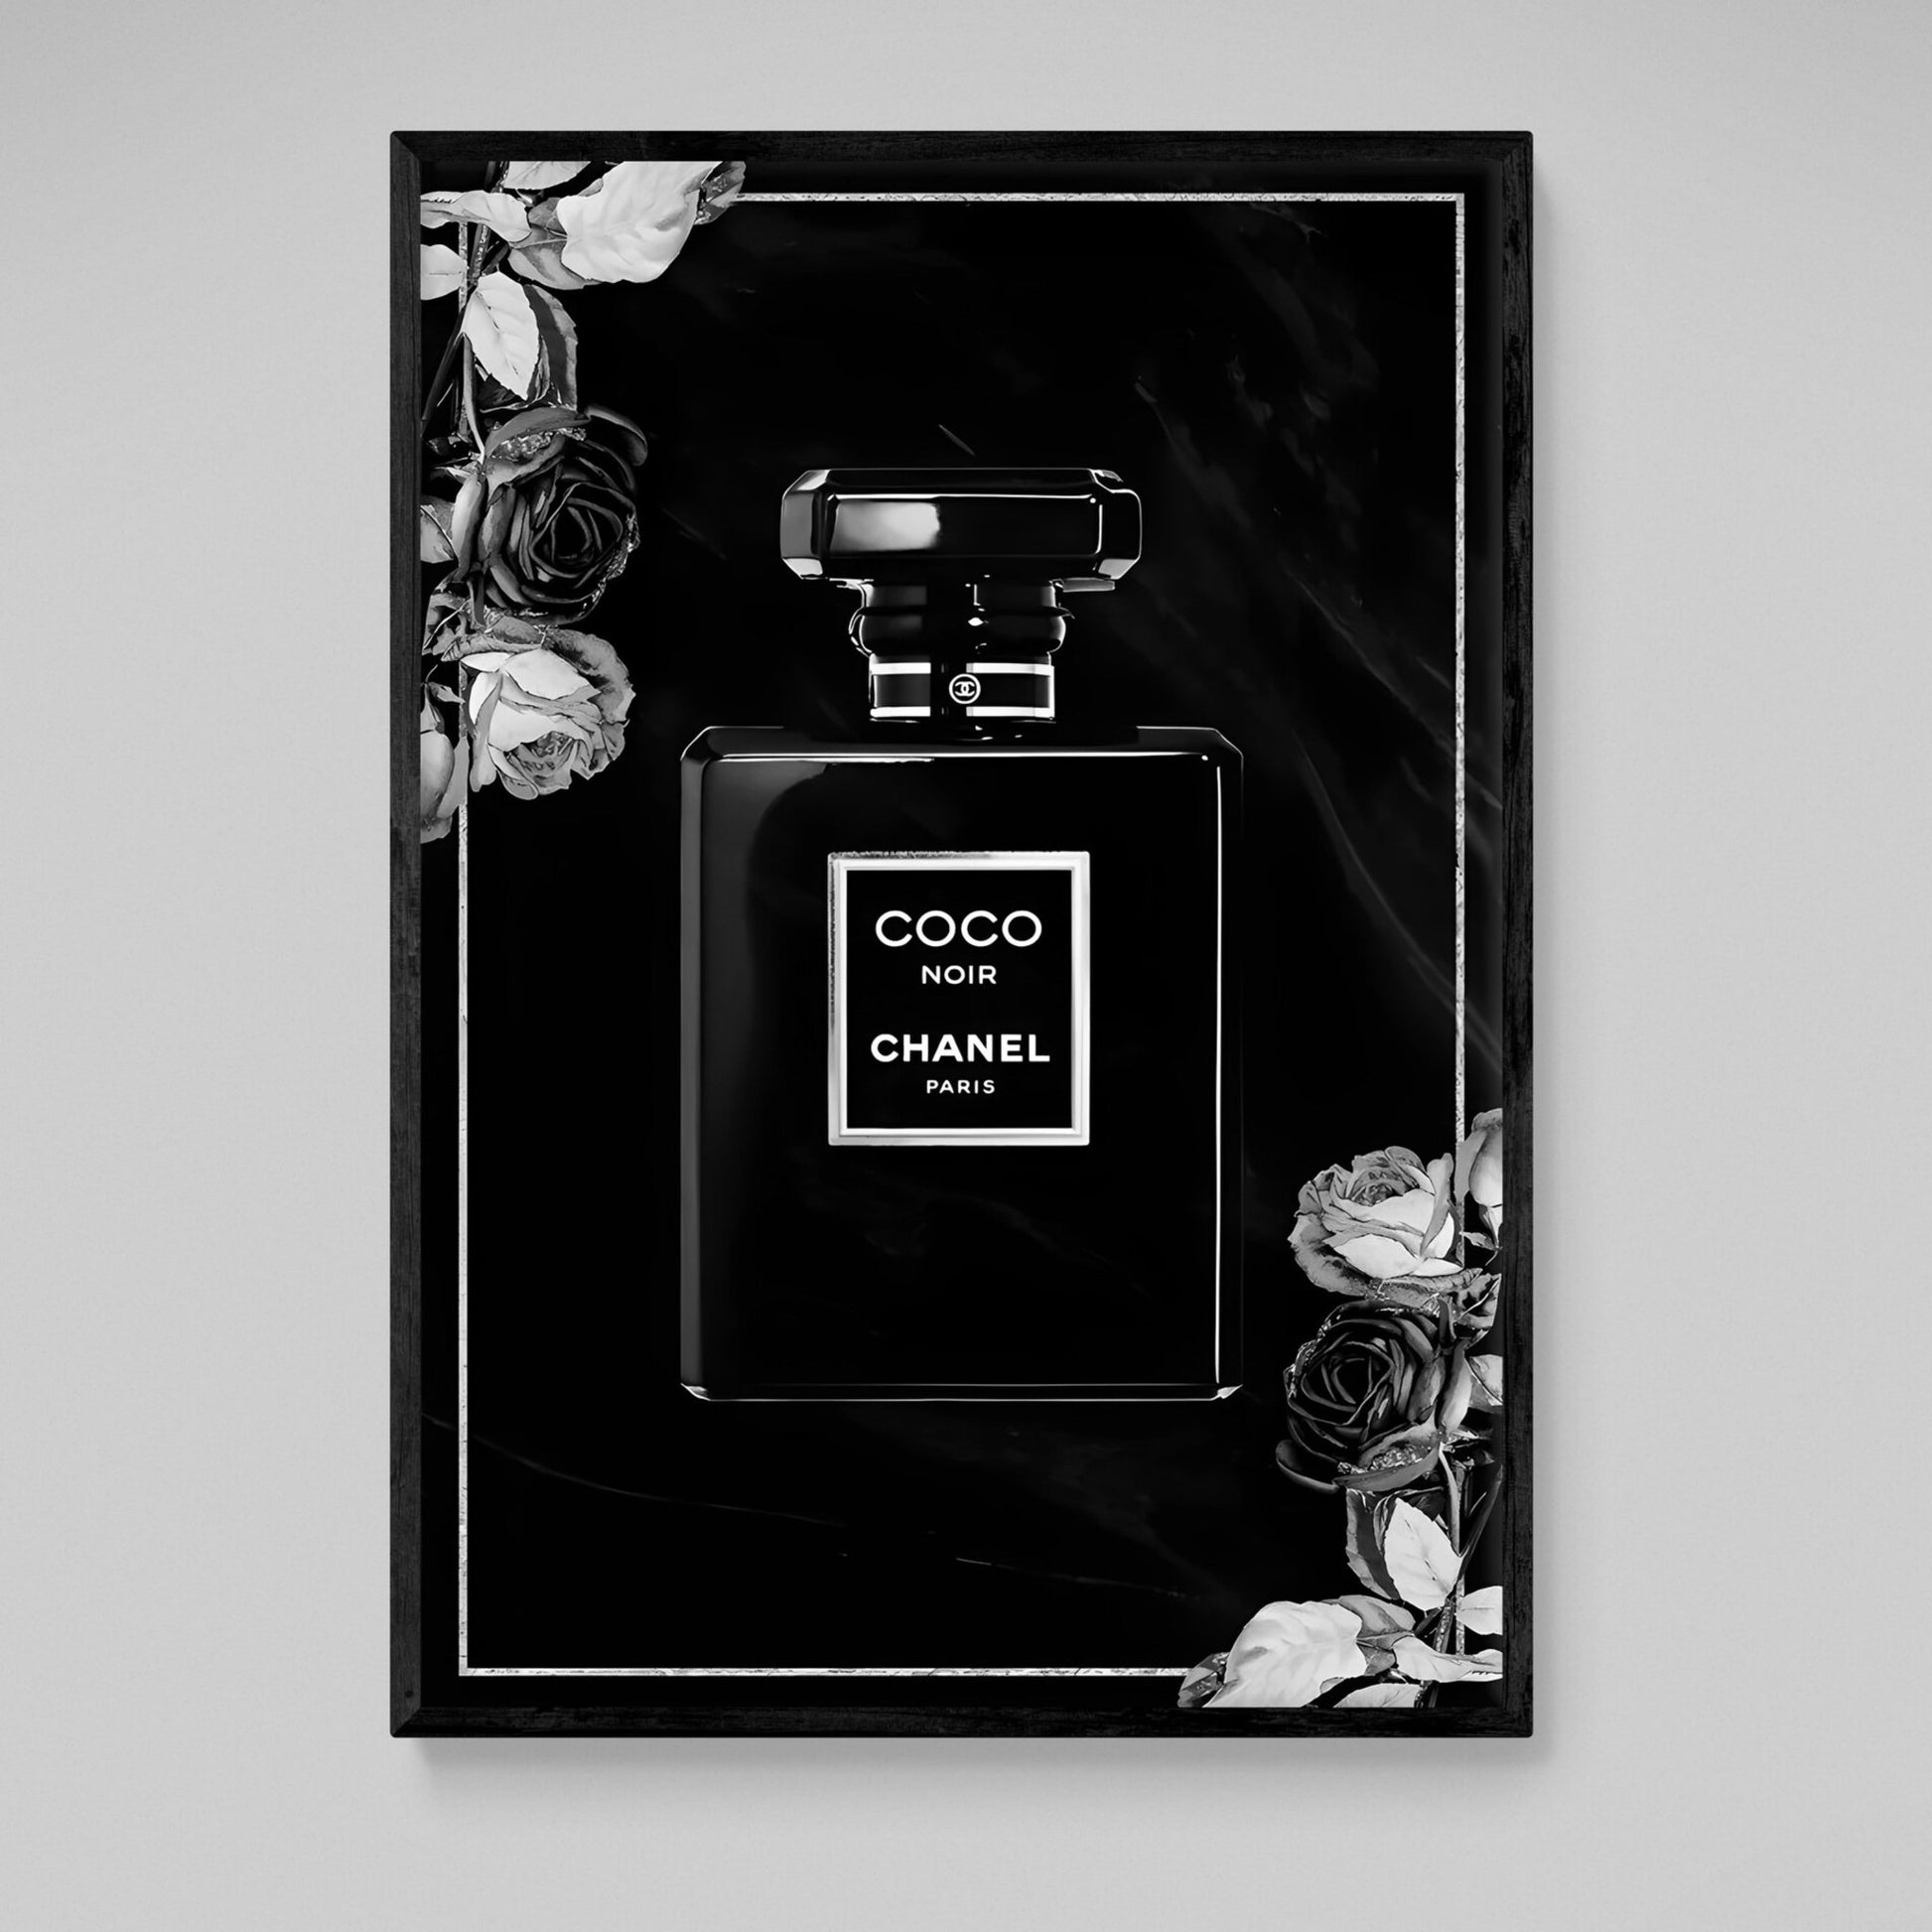 Chanel No 5 Framed Print - Products, bookmarks, design, inspiration and  ideas.